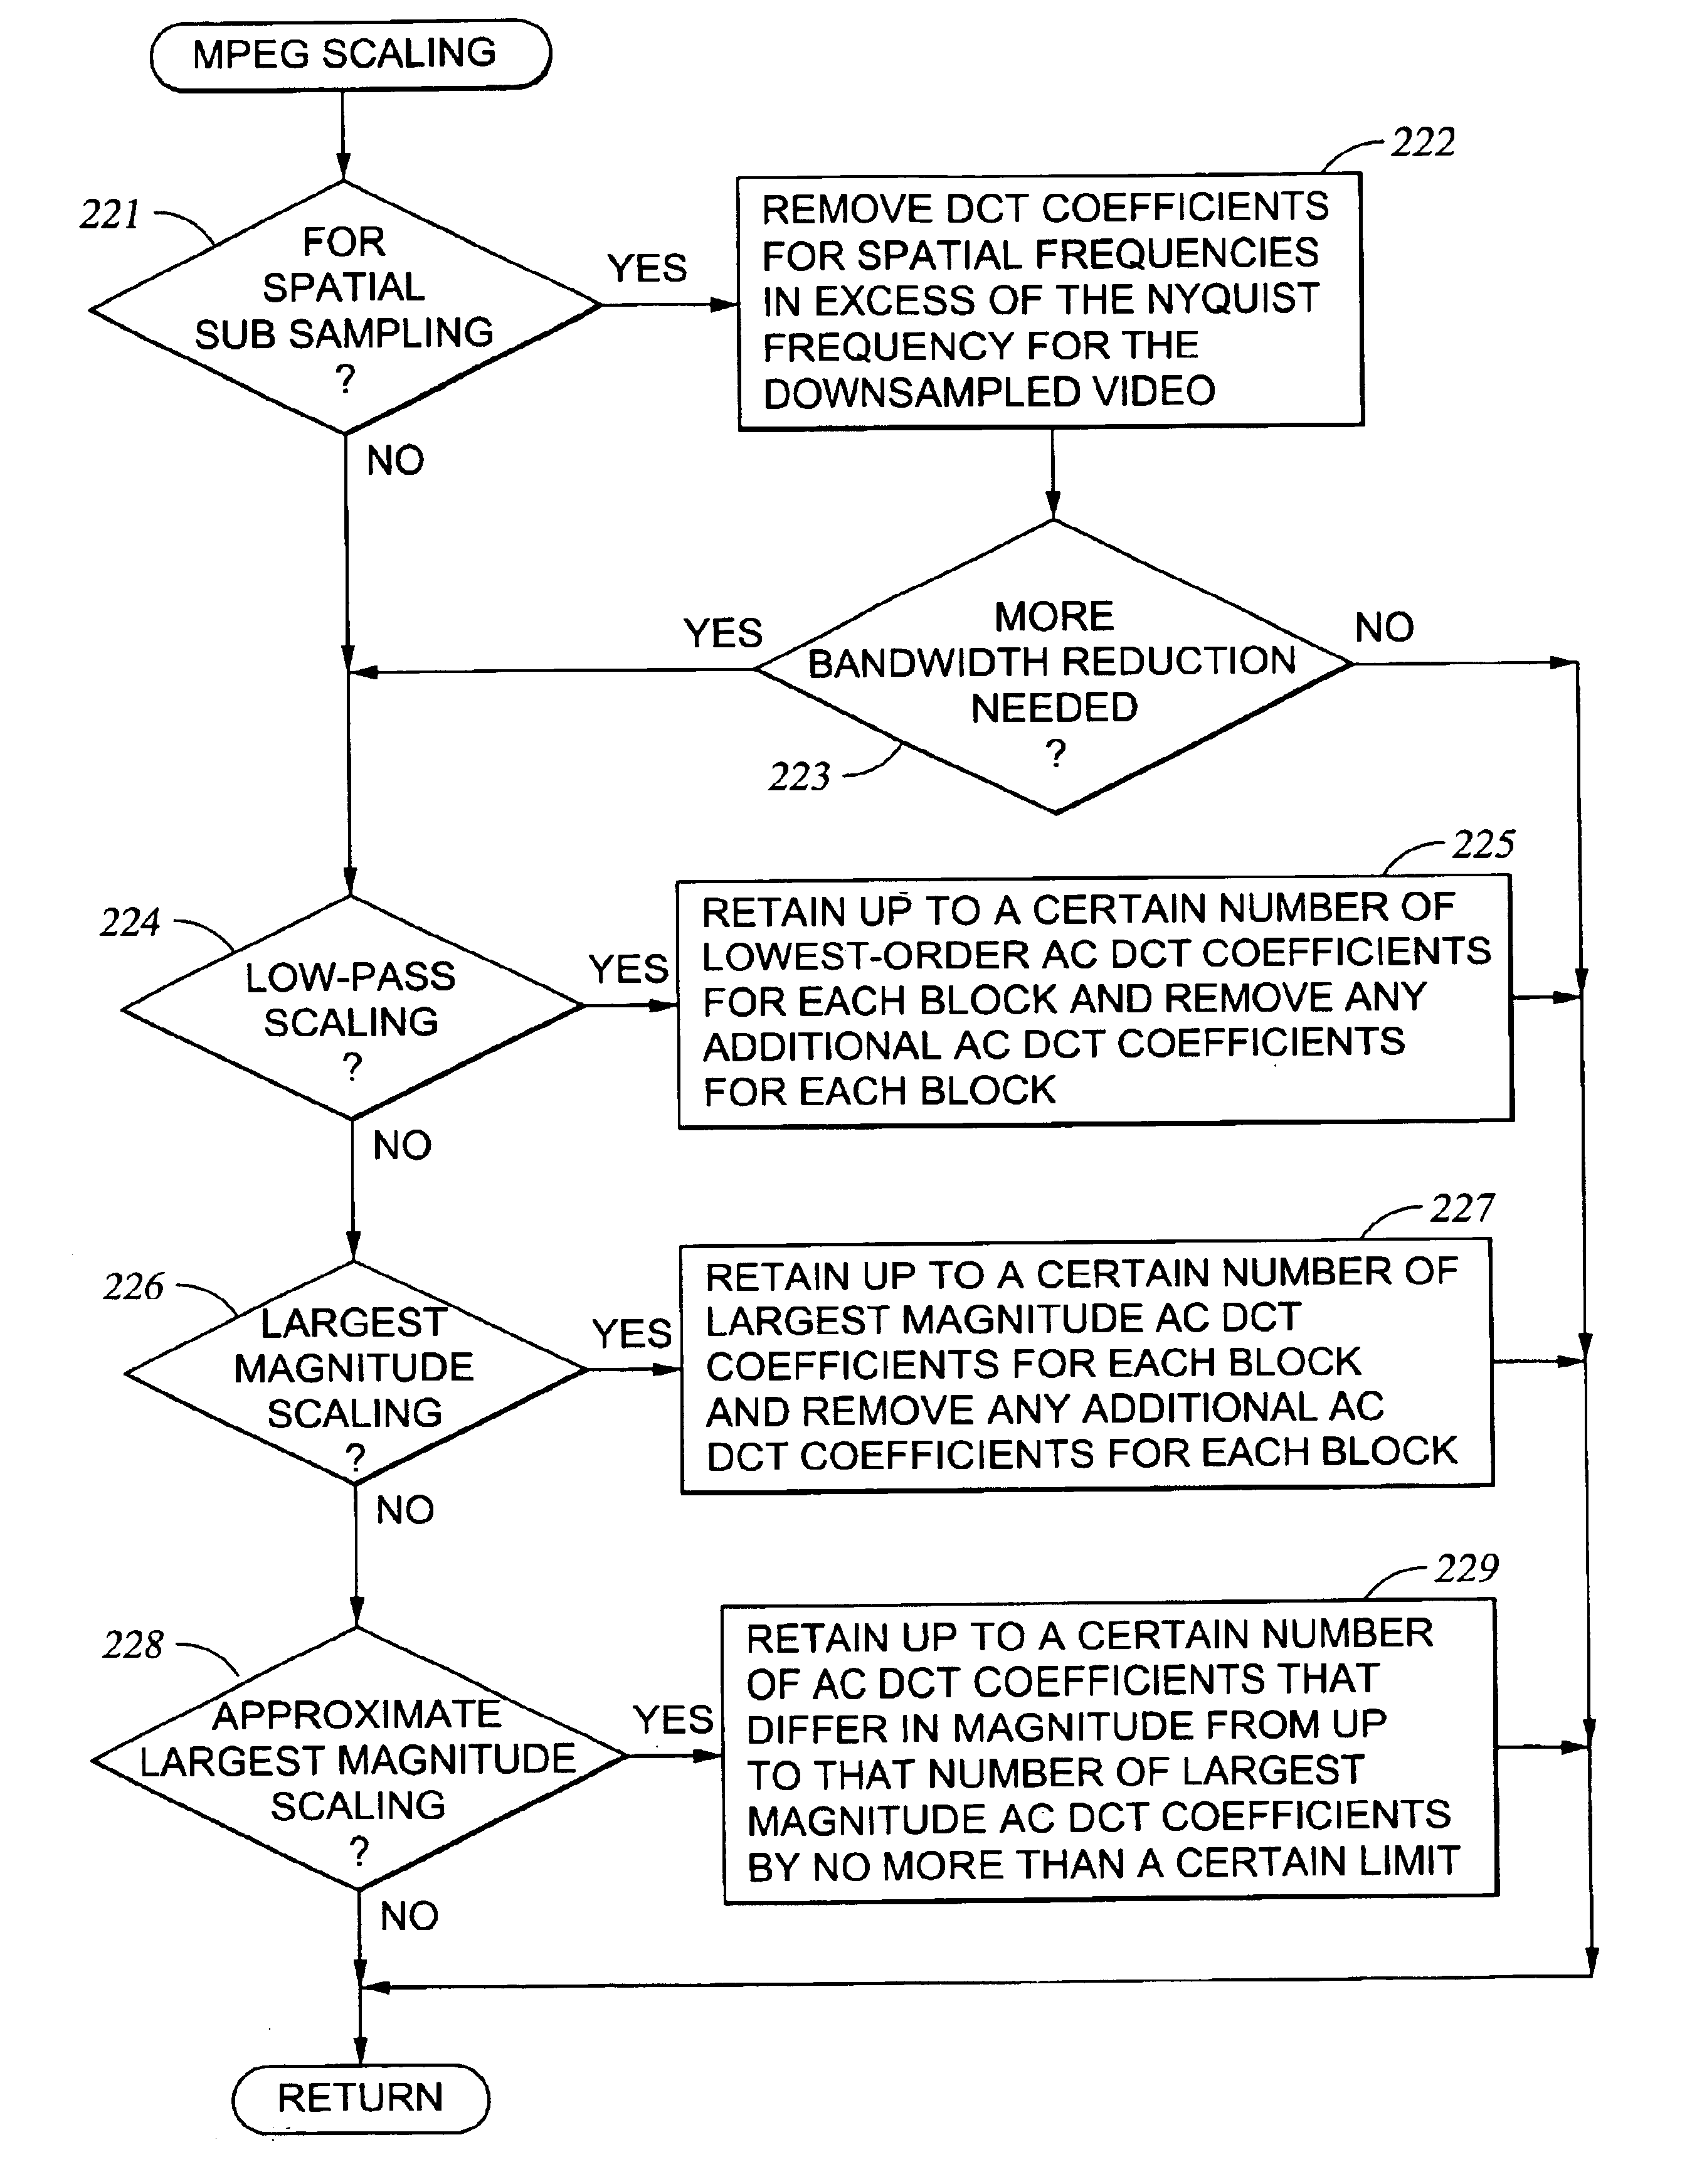 Adaptive bit rate control for rate reduction of MPEG coded video